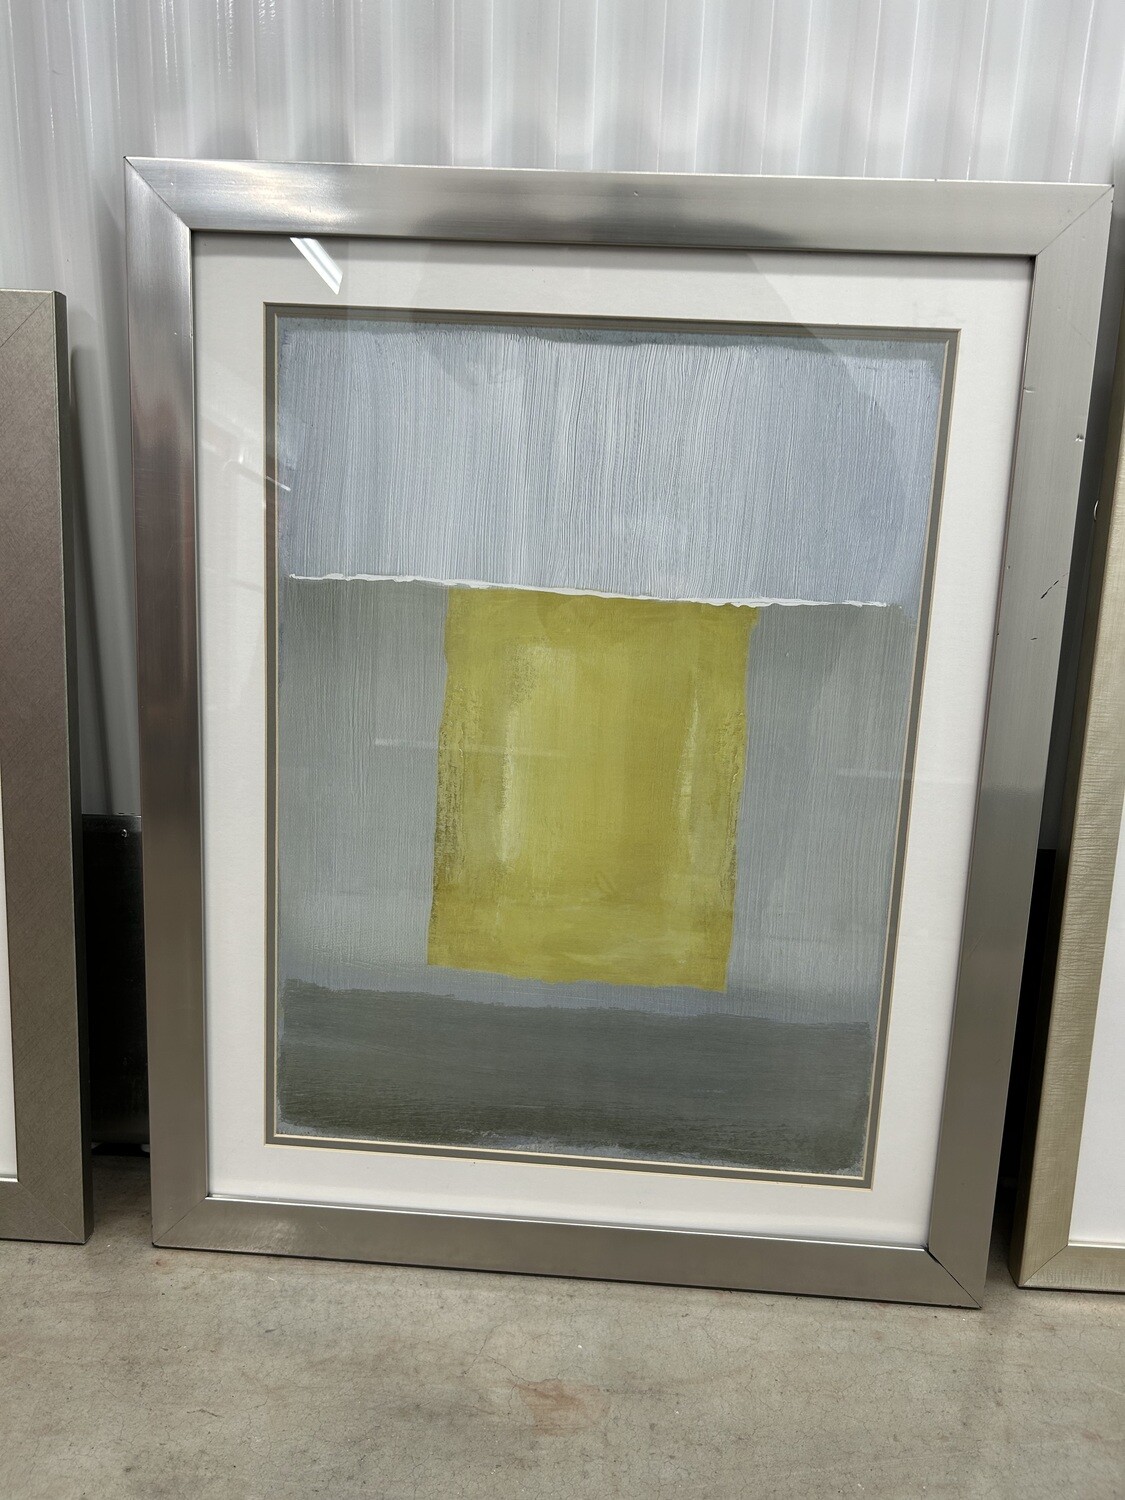 Framed Art: Contemporary - yellow, blue, gray #2214 ** 5 mos. to sell, reduced